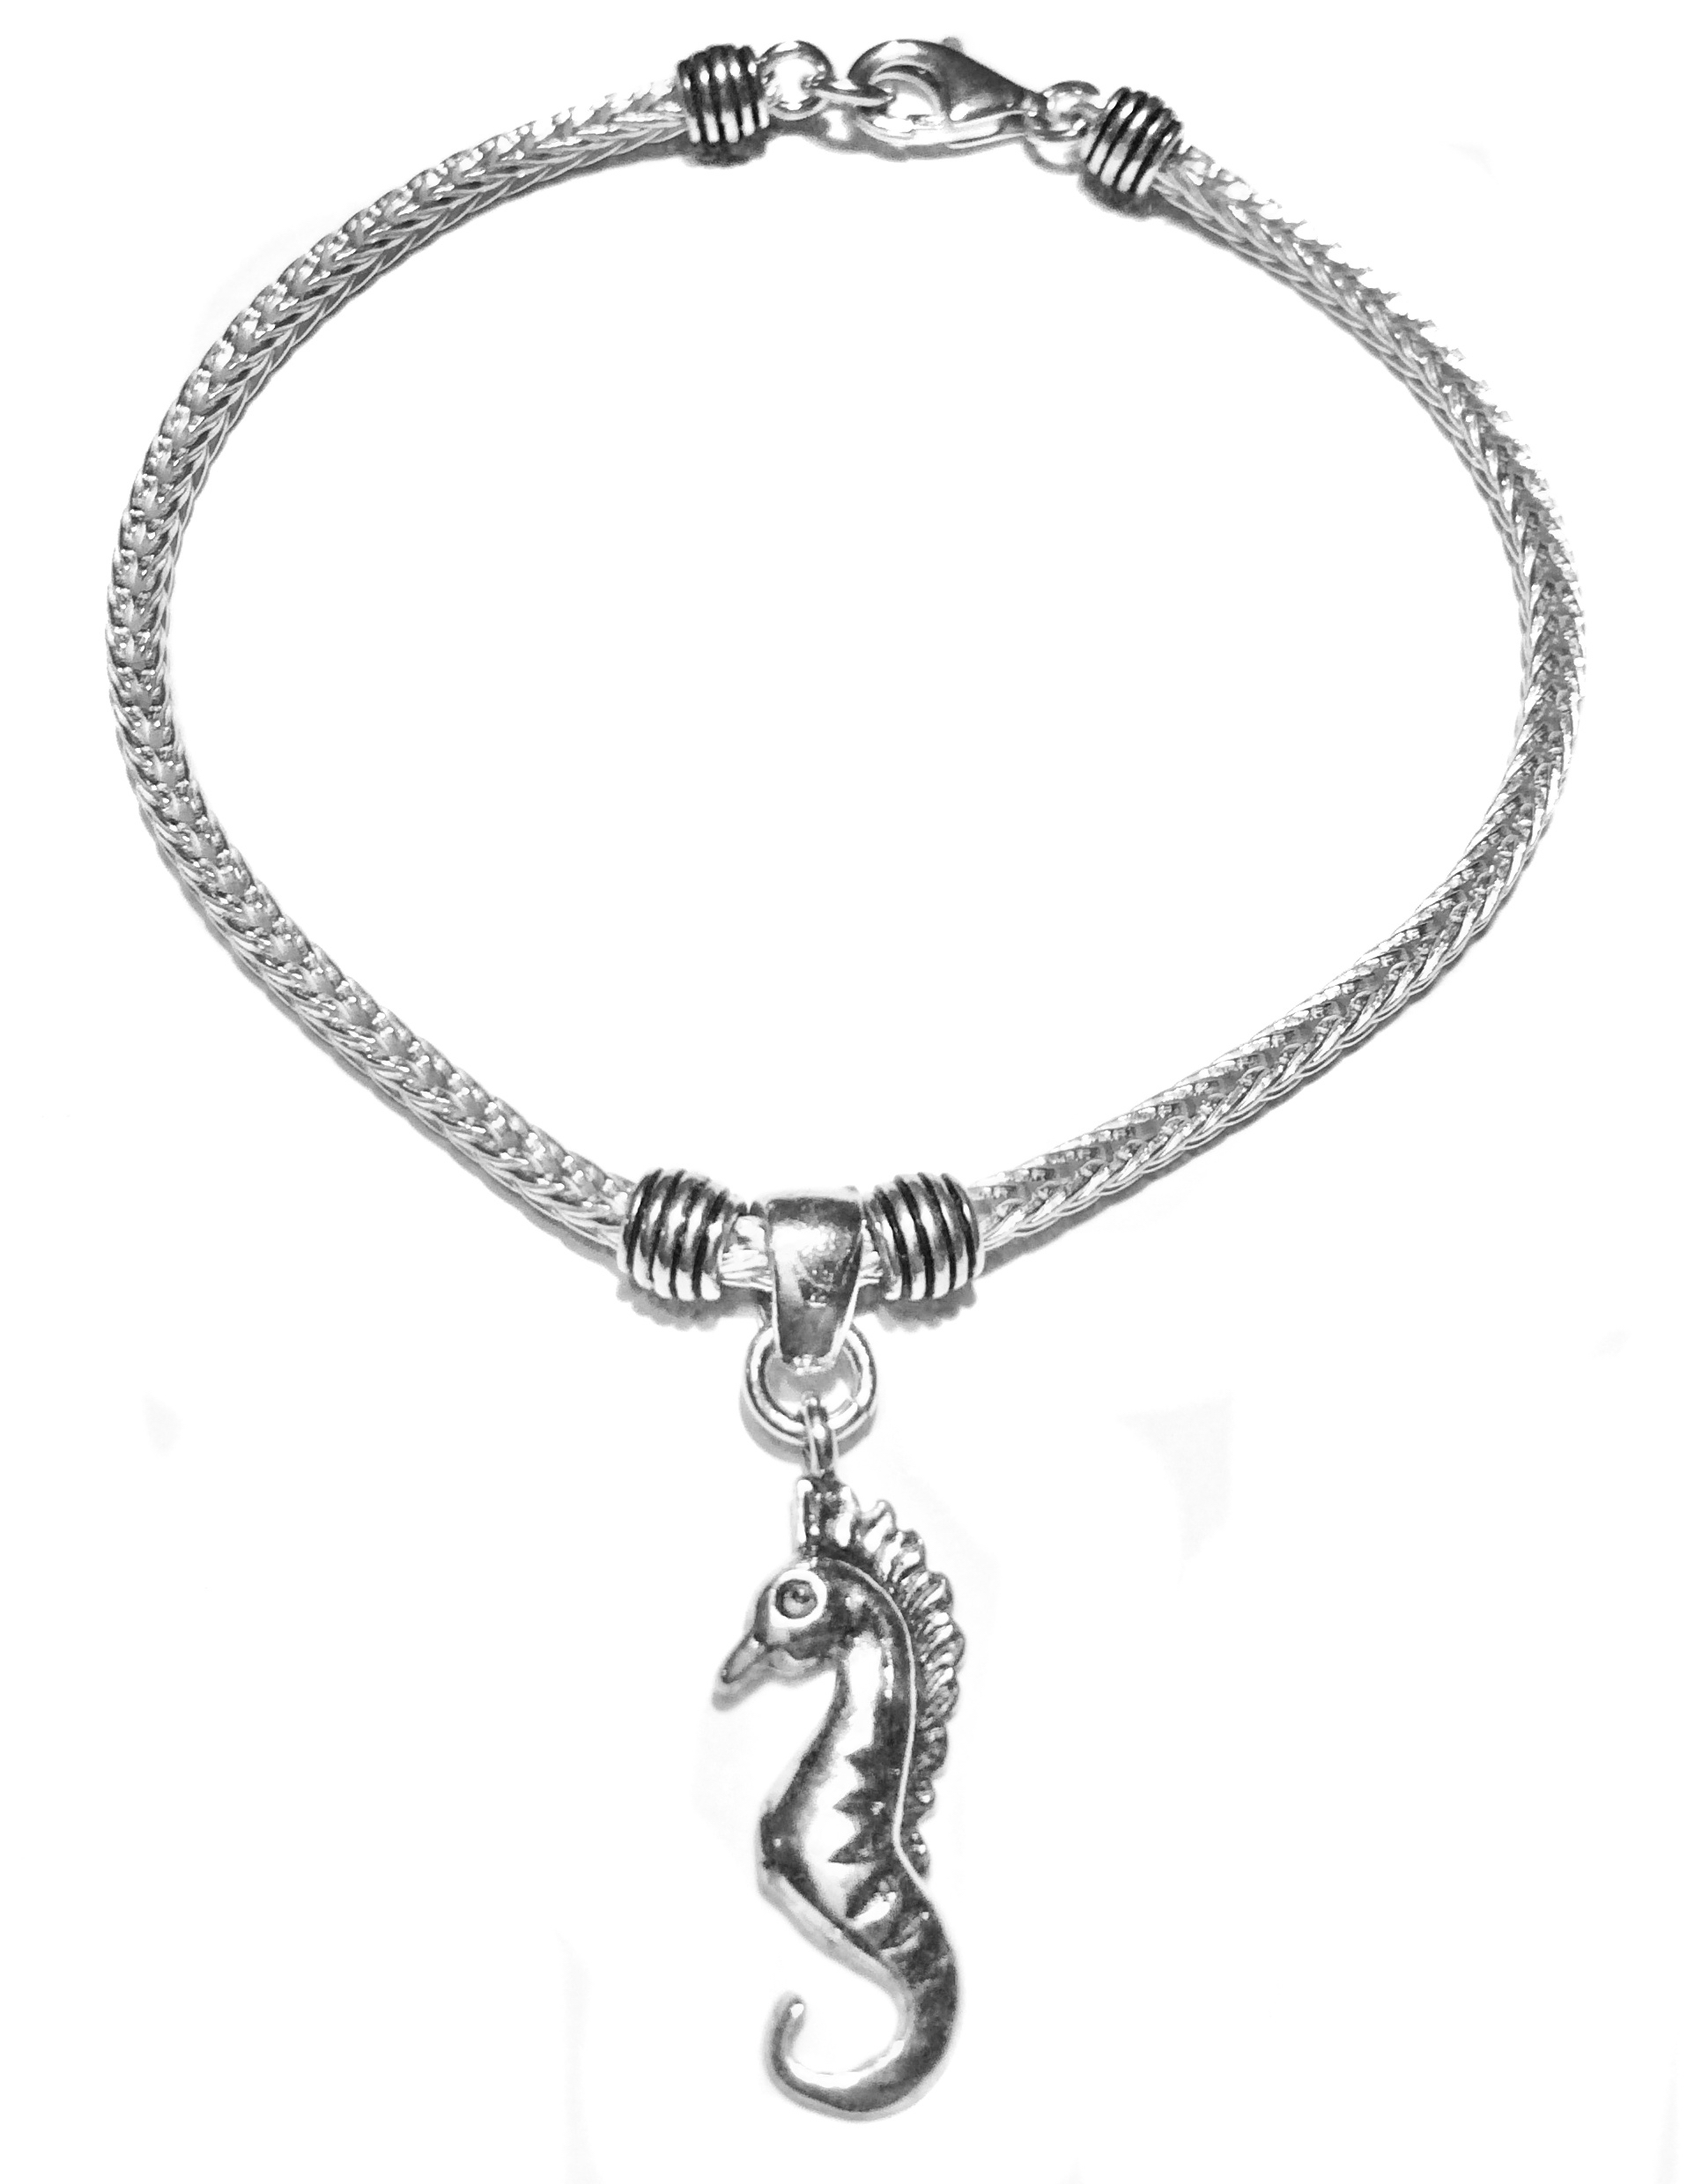 Sterling Silver Thematic Charm Bracelet Seahorse 9.5 gram ID # 6611 - Click Image to Close